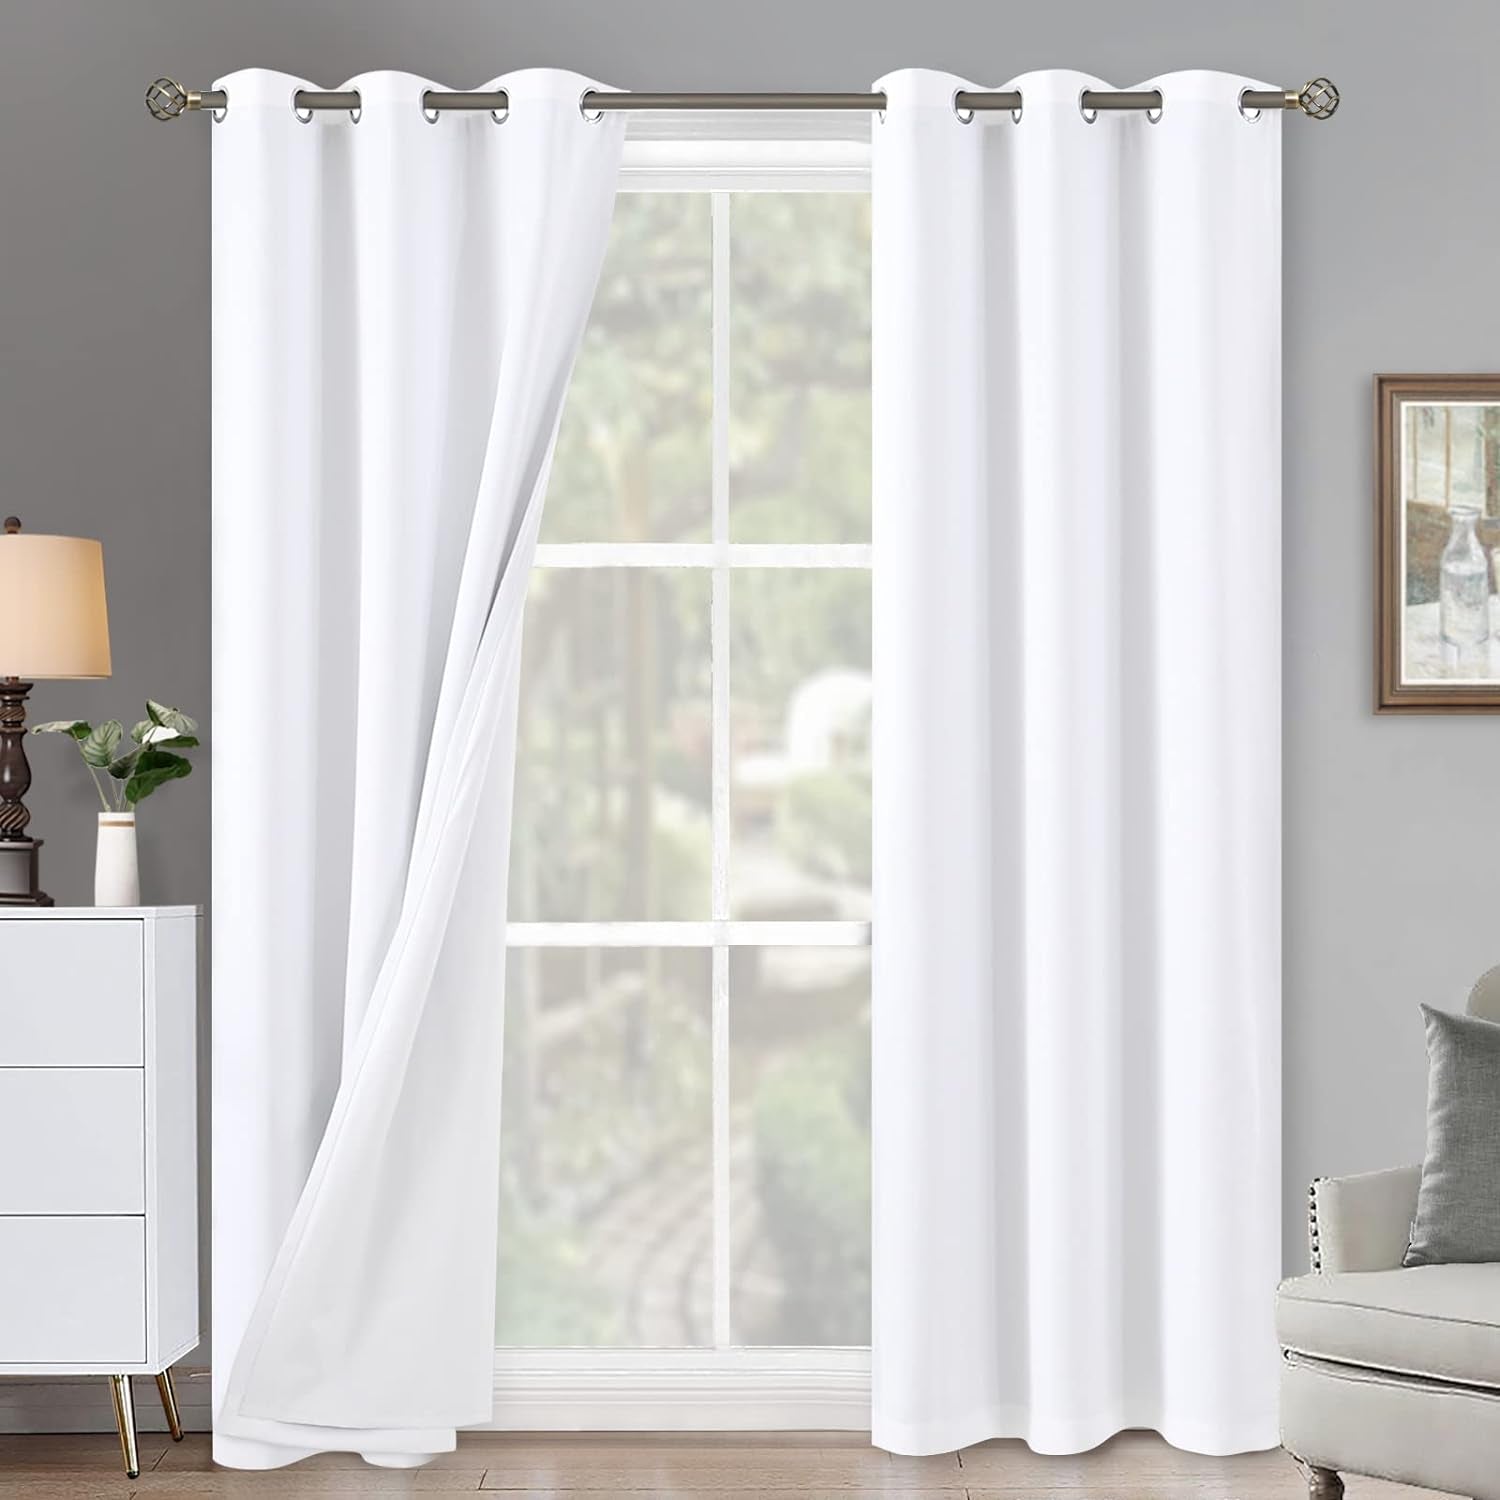 QUEMAS Short Blackout Curtains 54 Inch Length 2 Panels, 100% Light Blocking Thermal Insulated Soundproof Grommet Small Window Curtains for Bedroom Basement with Black Liner, Each 42 Inch Wide, White  QUEMAS White + White Lining W42 X L84 